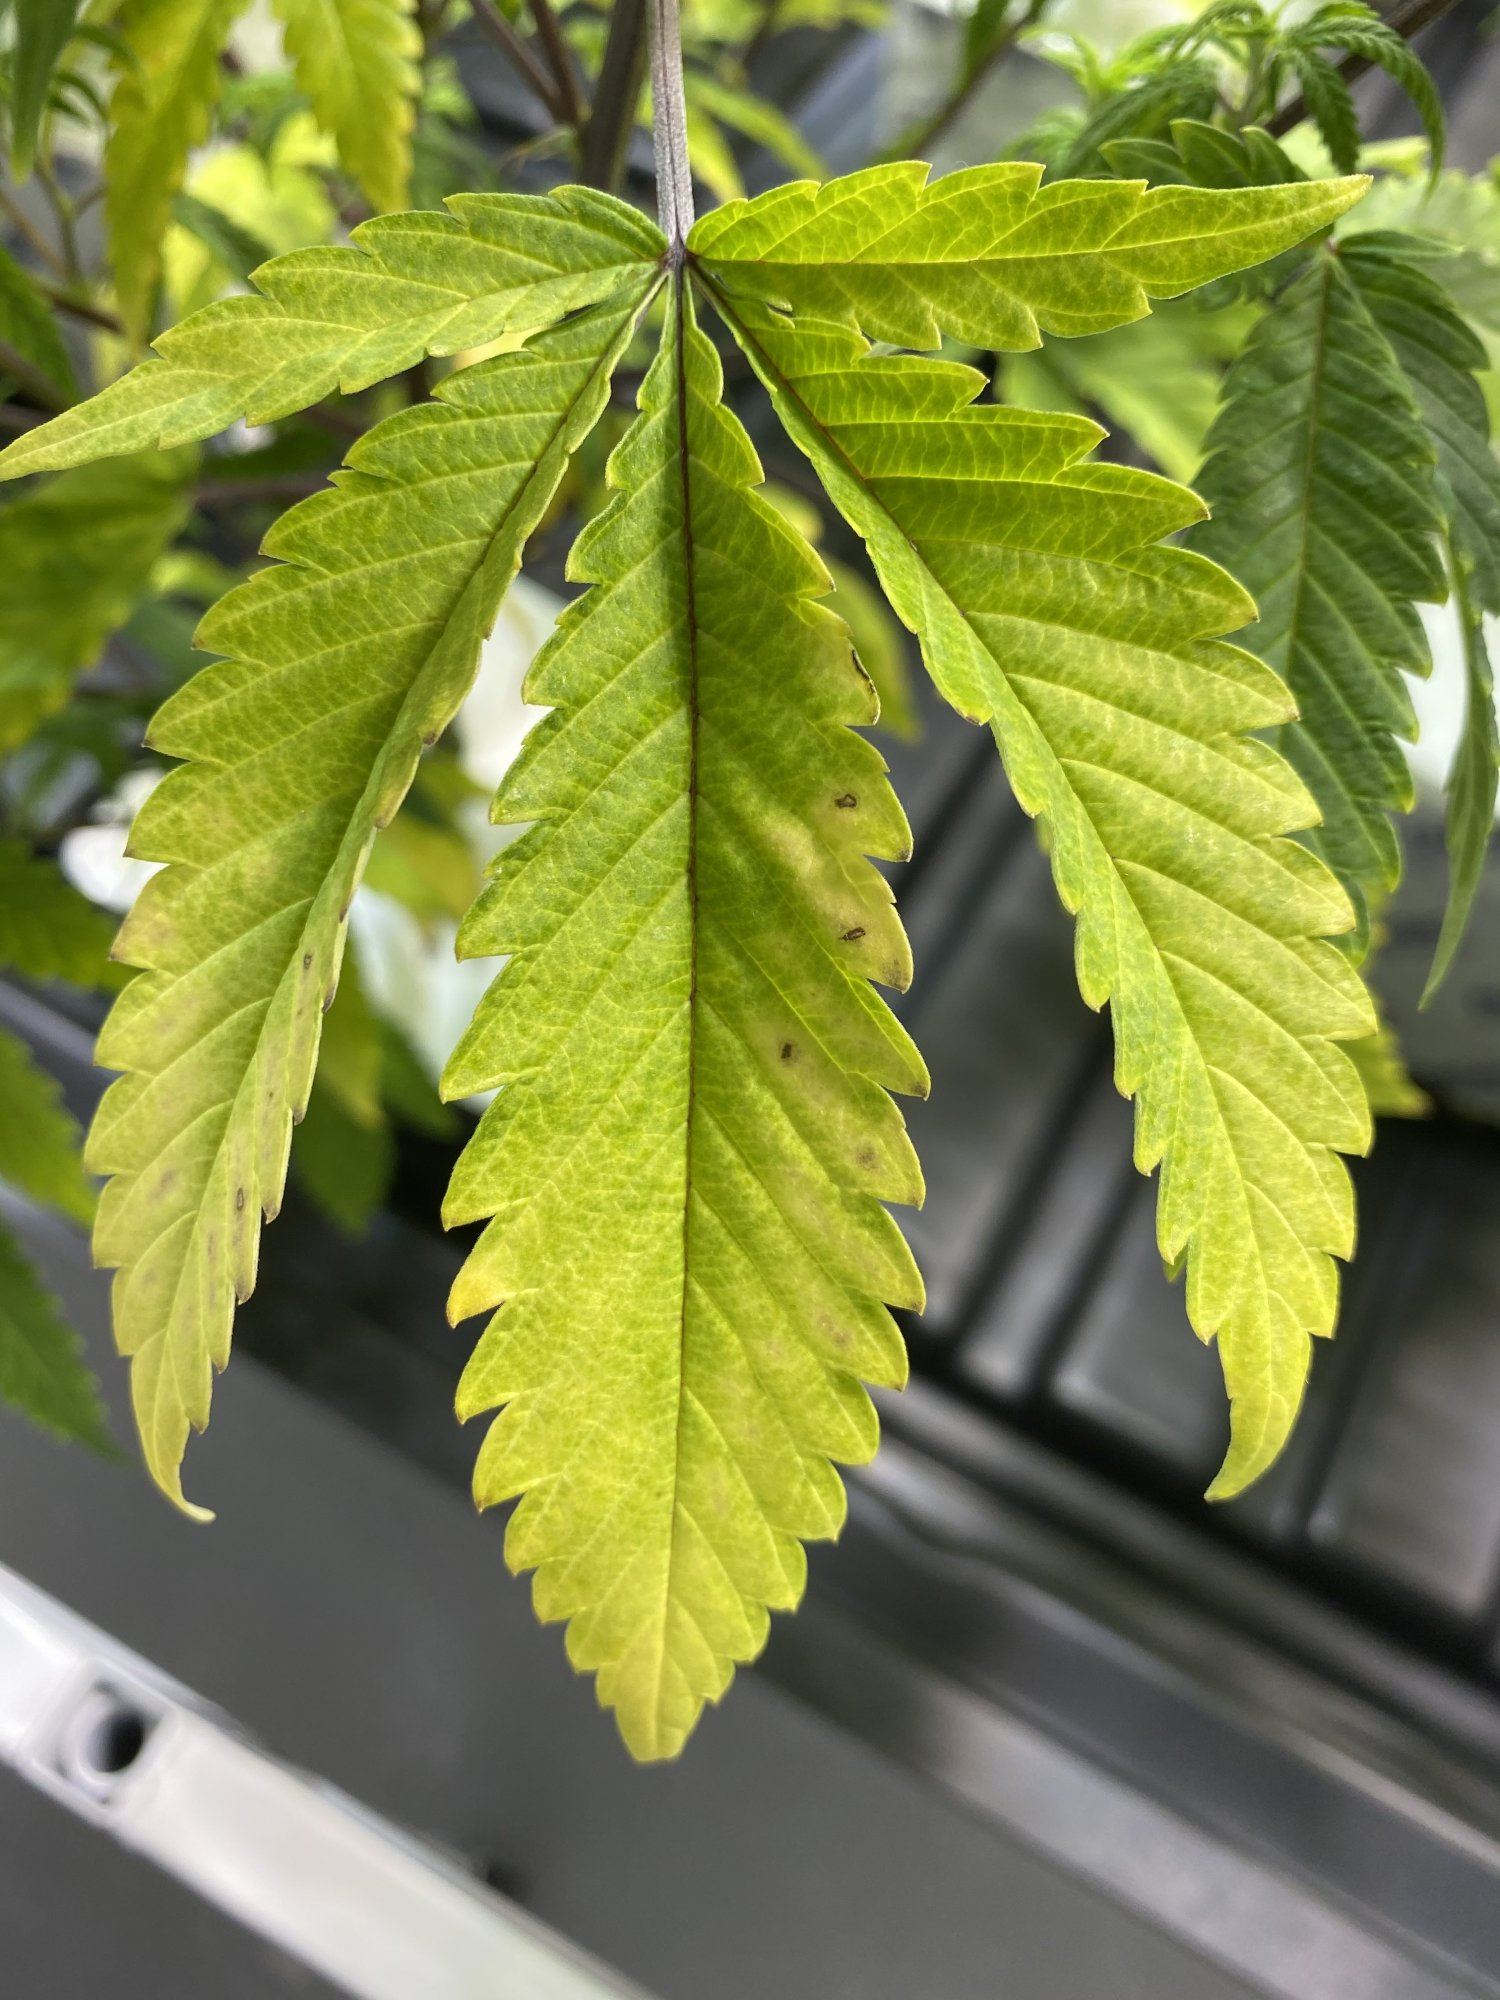 Low ph runoff   discoloration and leaf curl see pics 2